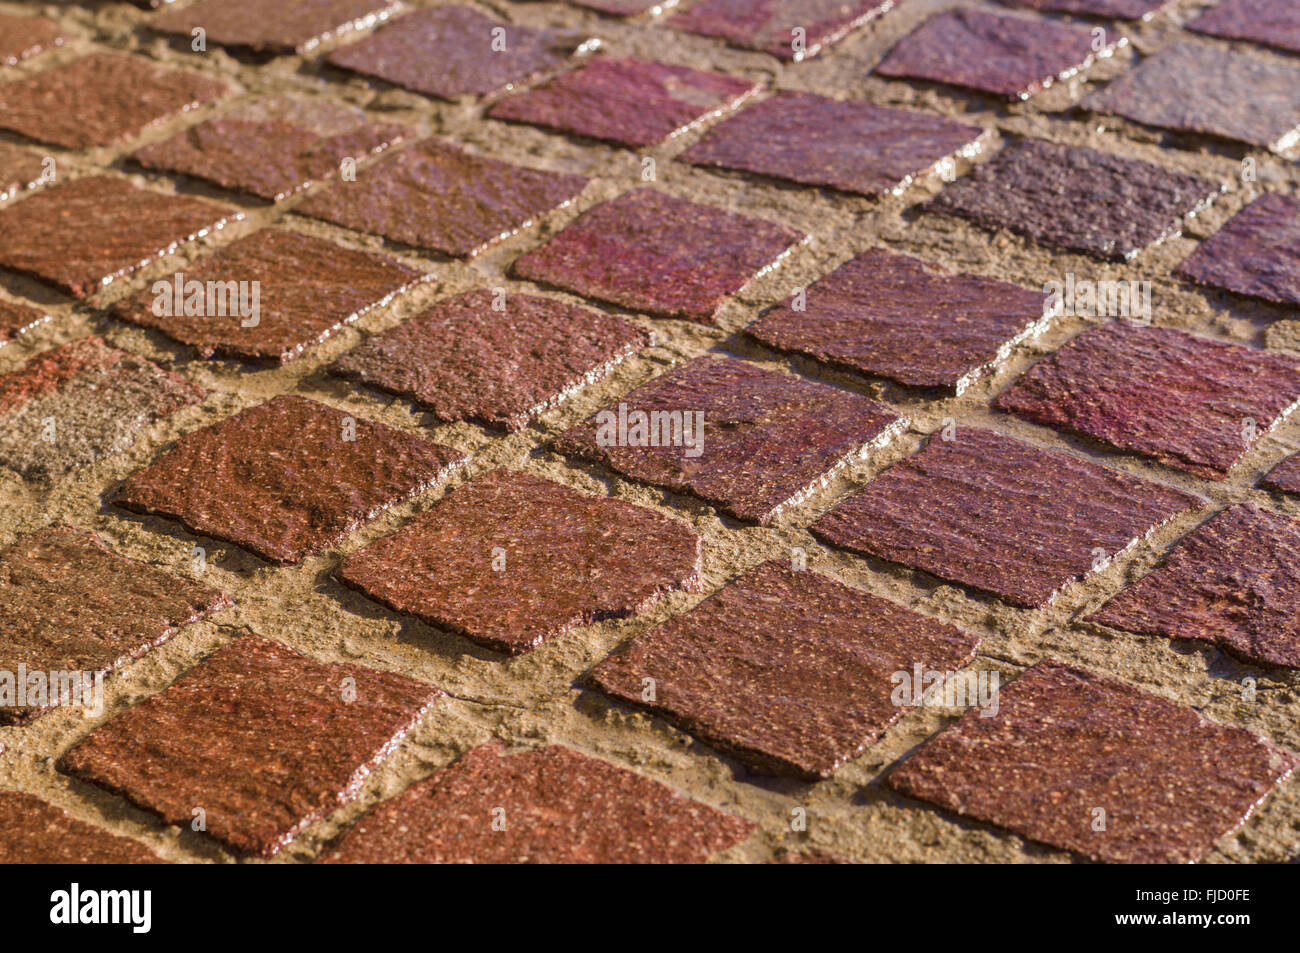 Decorative square tiled ground, wet after rain, shallow depth of field Stock Photo